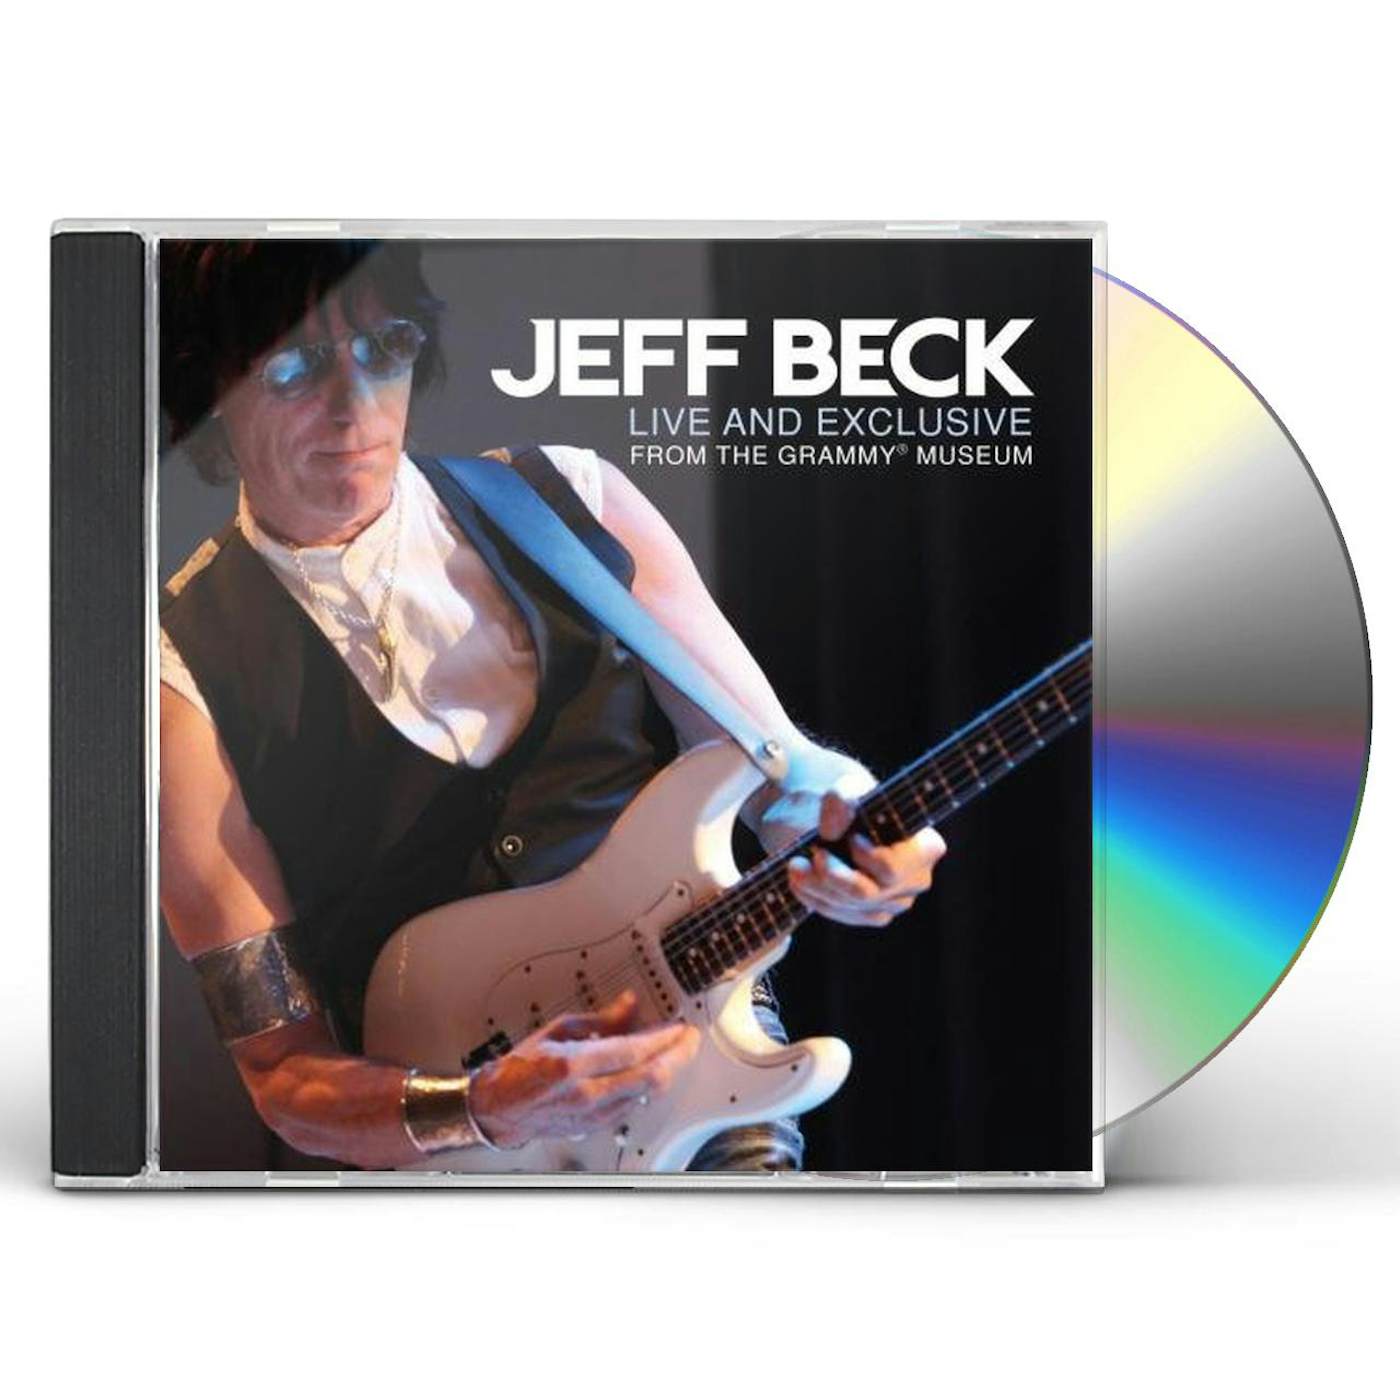 Jeff Beck LIVE & EXCLUSIVE FROM THE GRAMMY MUSEUM CD